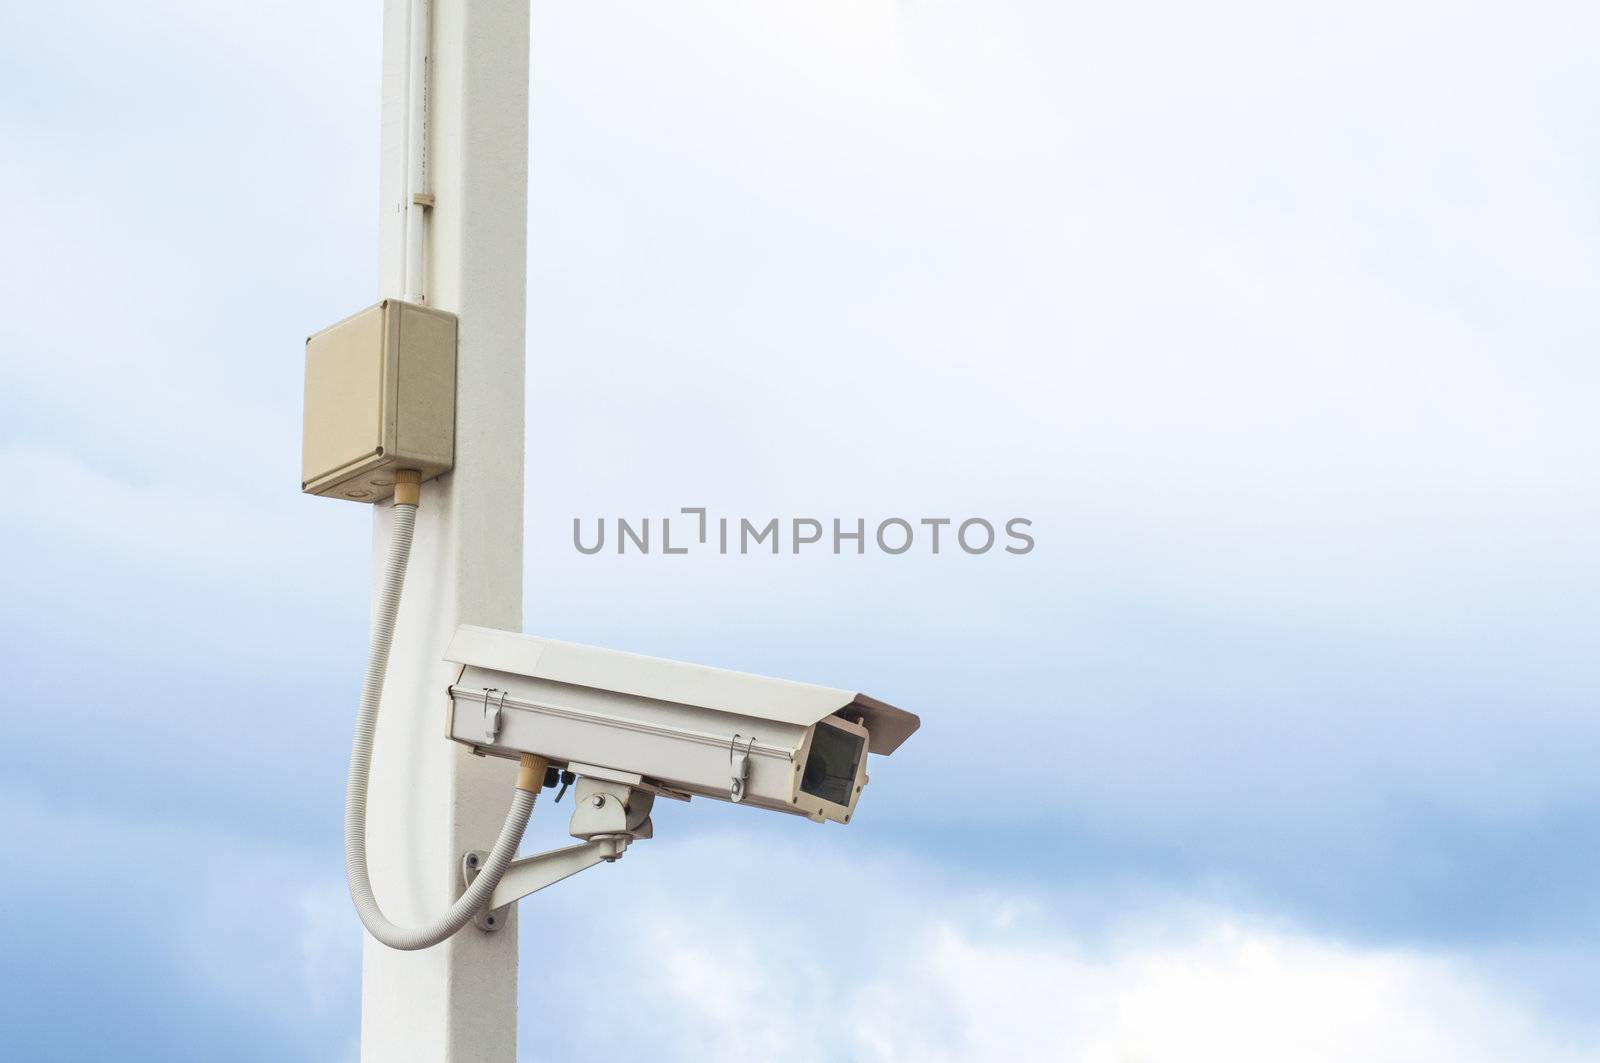 Security camera on the post with outdoor housing